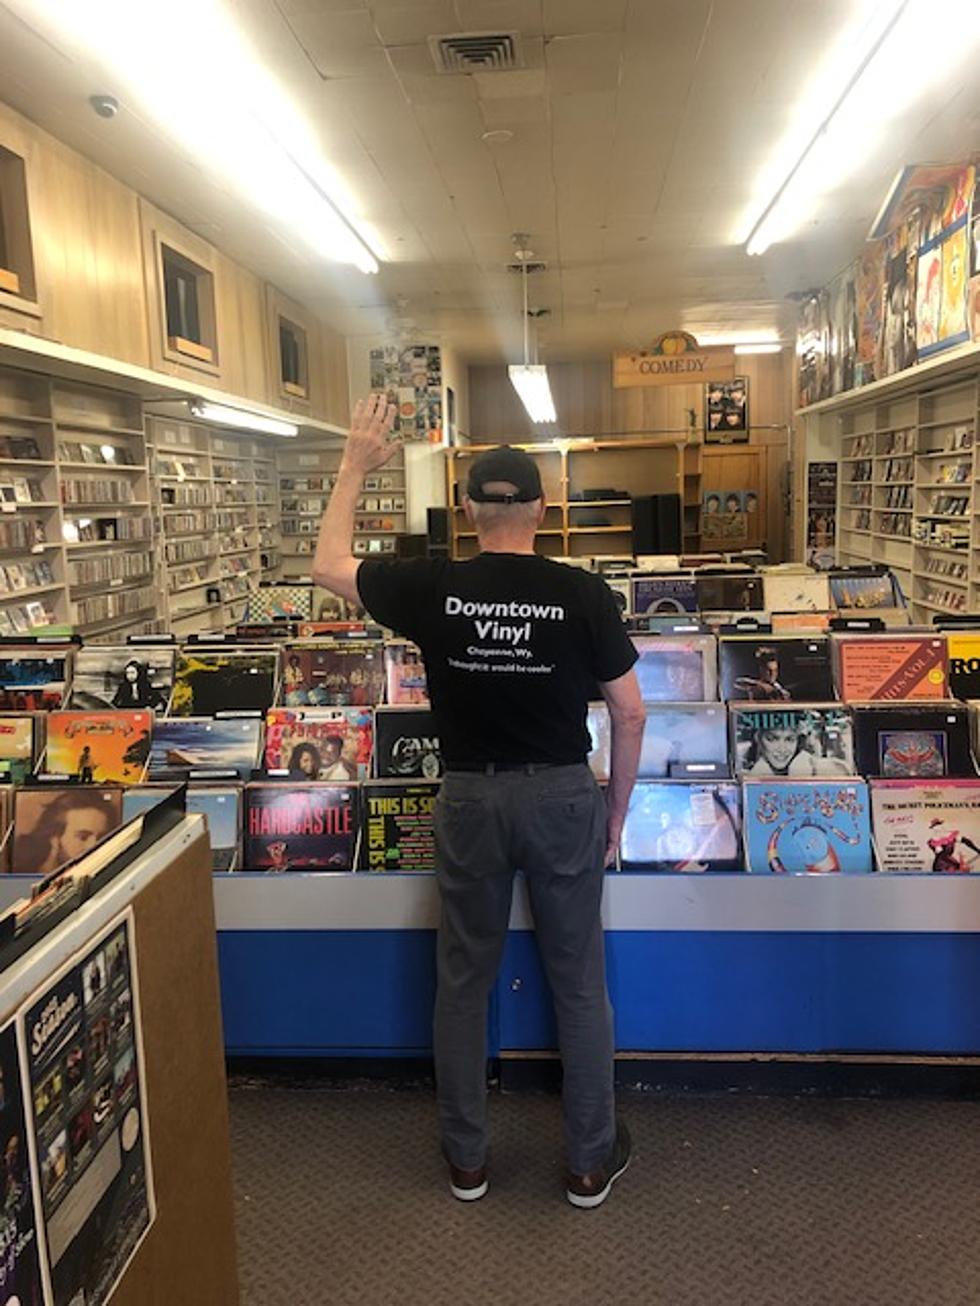 We Will Miss You Don! Cheyenne&#8217;s Downtown Vinyl Has A New Owner